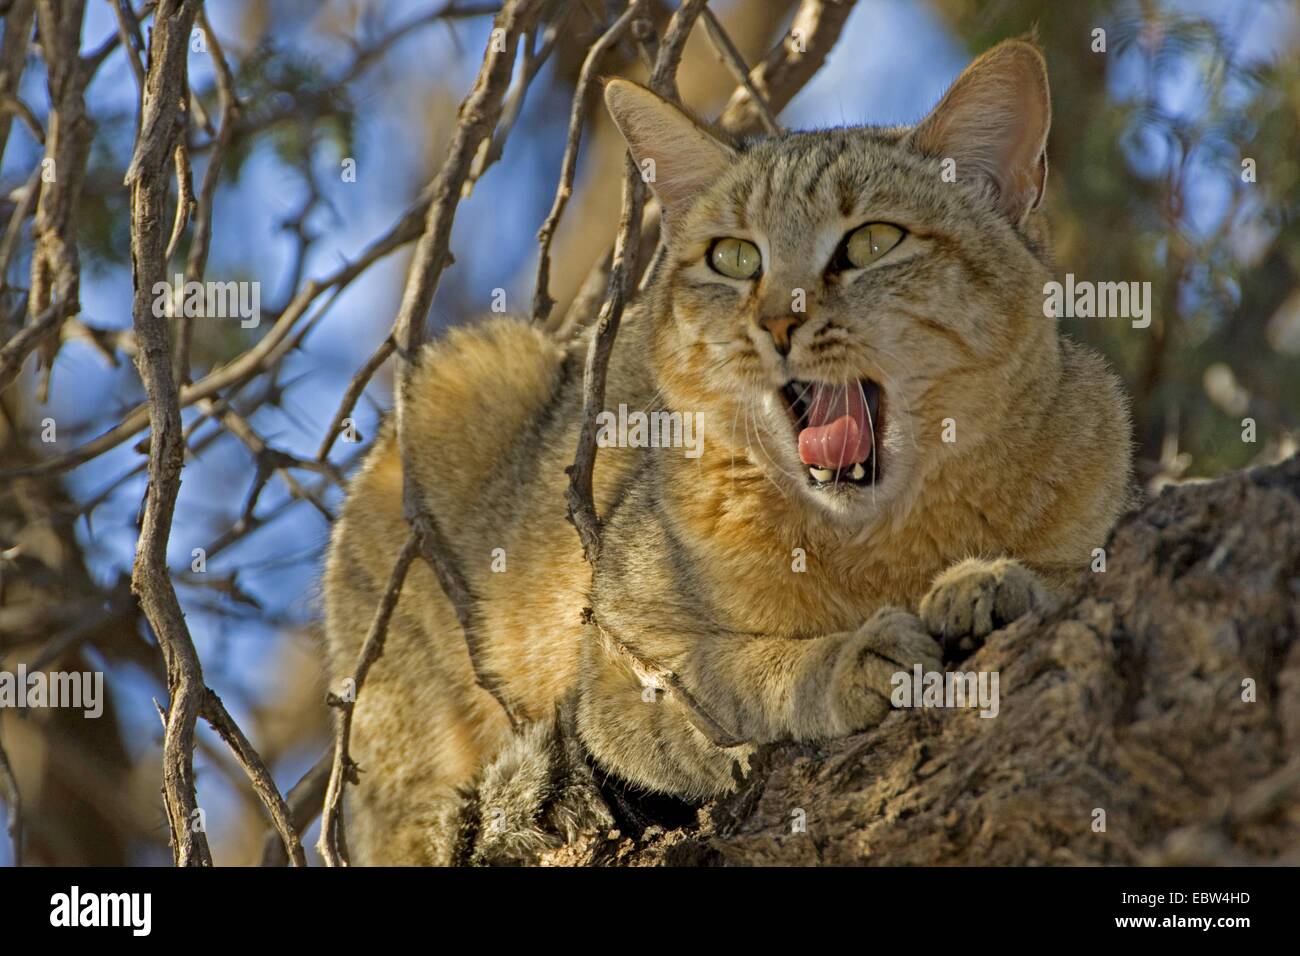 African wildcat (Felis lybica, Felis libyca, Felis silvestris lybica, Felis silvestris libyca), lying on a branch yawning, South Africa, Northern Cape, Kgalagadi Transfrontier National Park Stock Photo